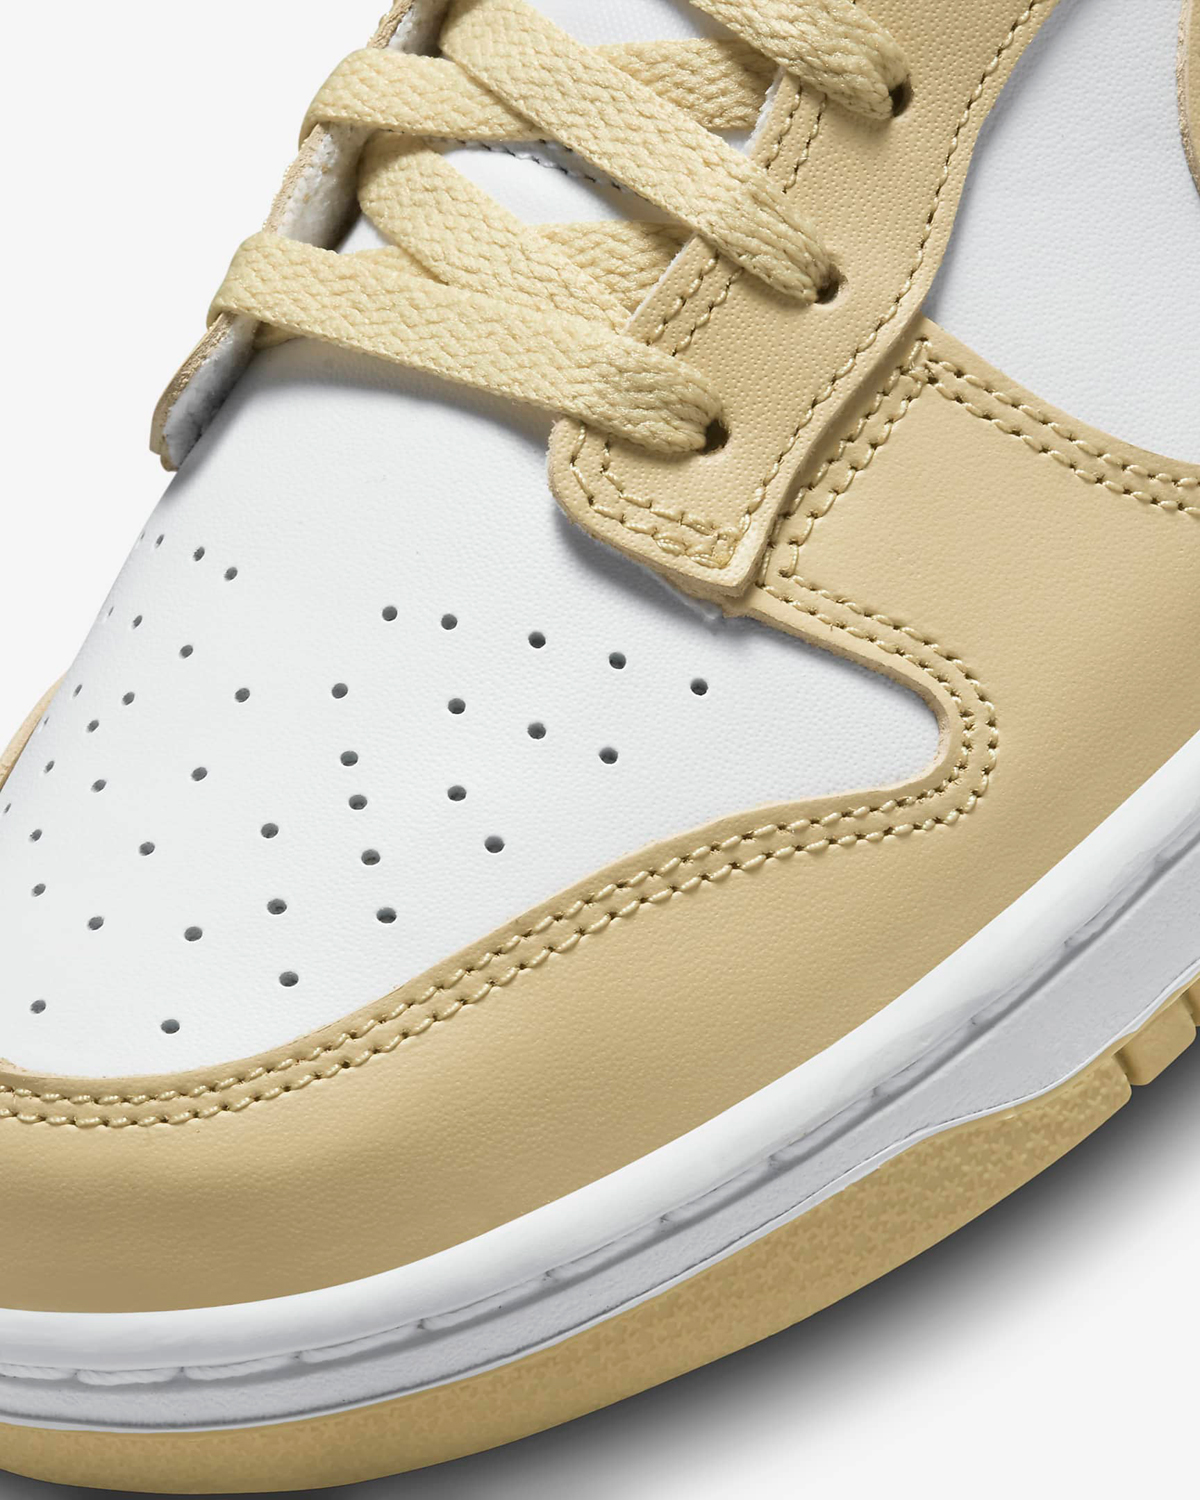 Nike-Dunk-Low-Team-Gold-Release-Date-7